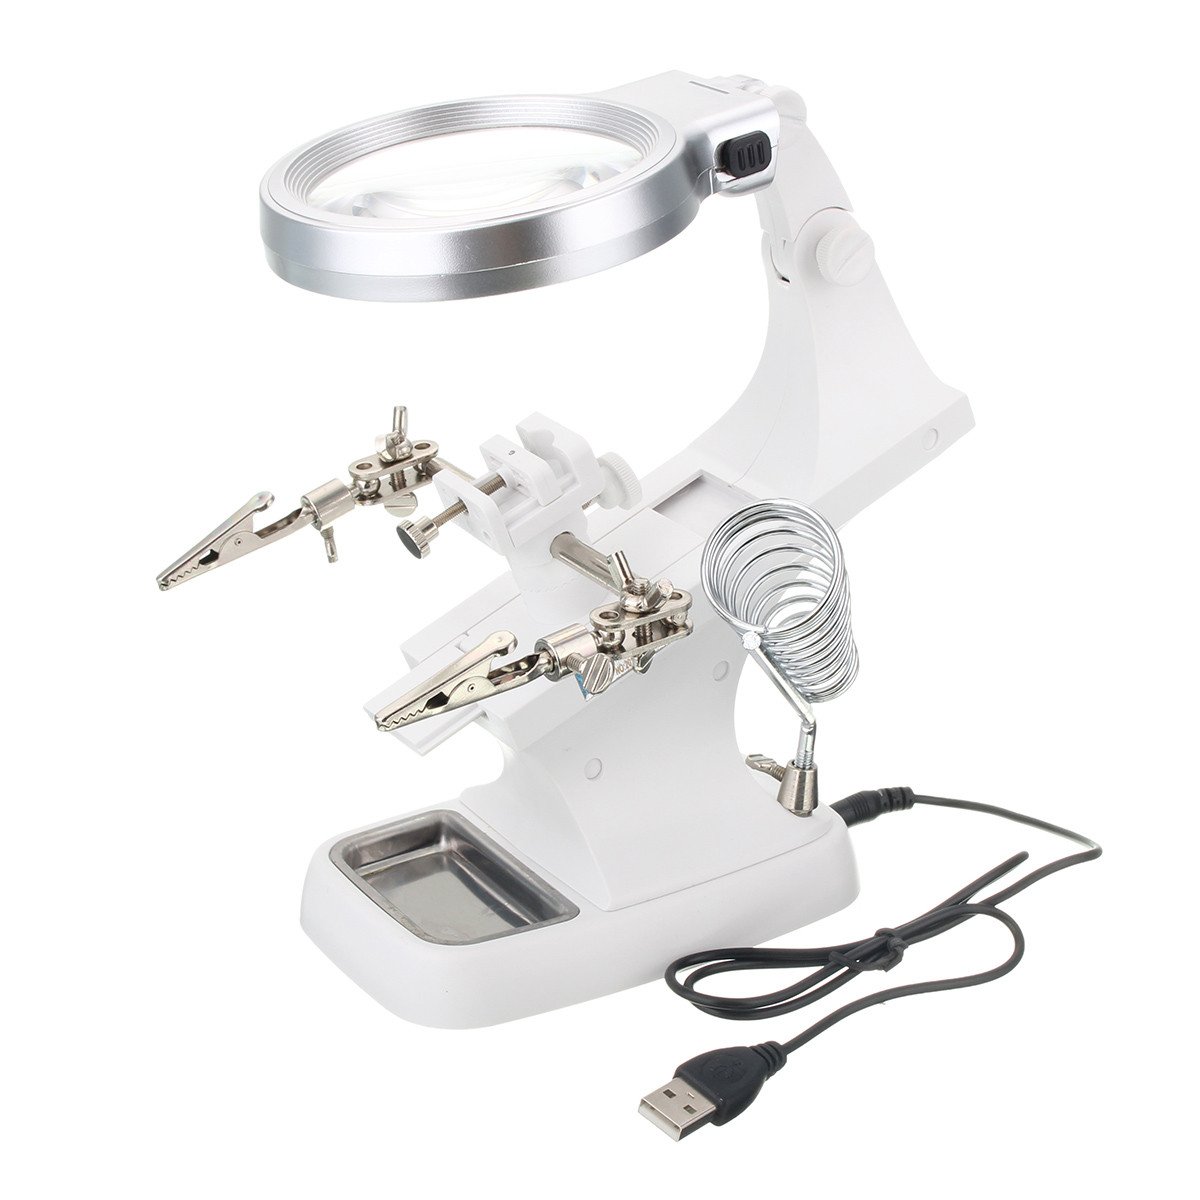 Adjustable LED Magnifier Helping Hand Soldering Iron Stand Magnifying Lens Clamp Tool - Ideal When a Third Hand is Needed